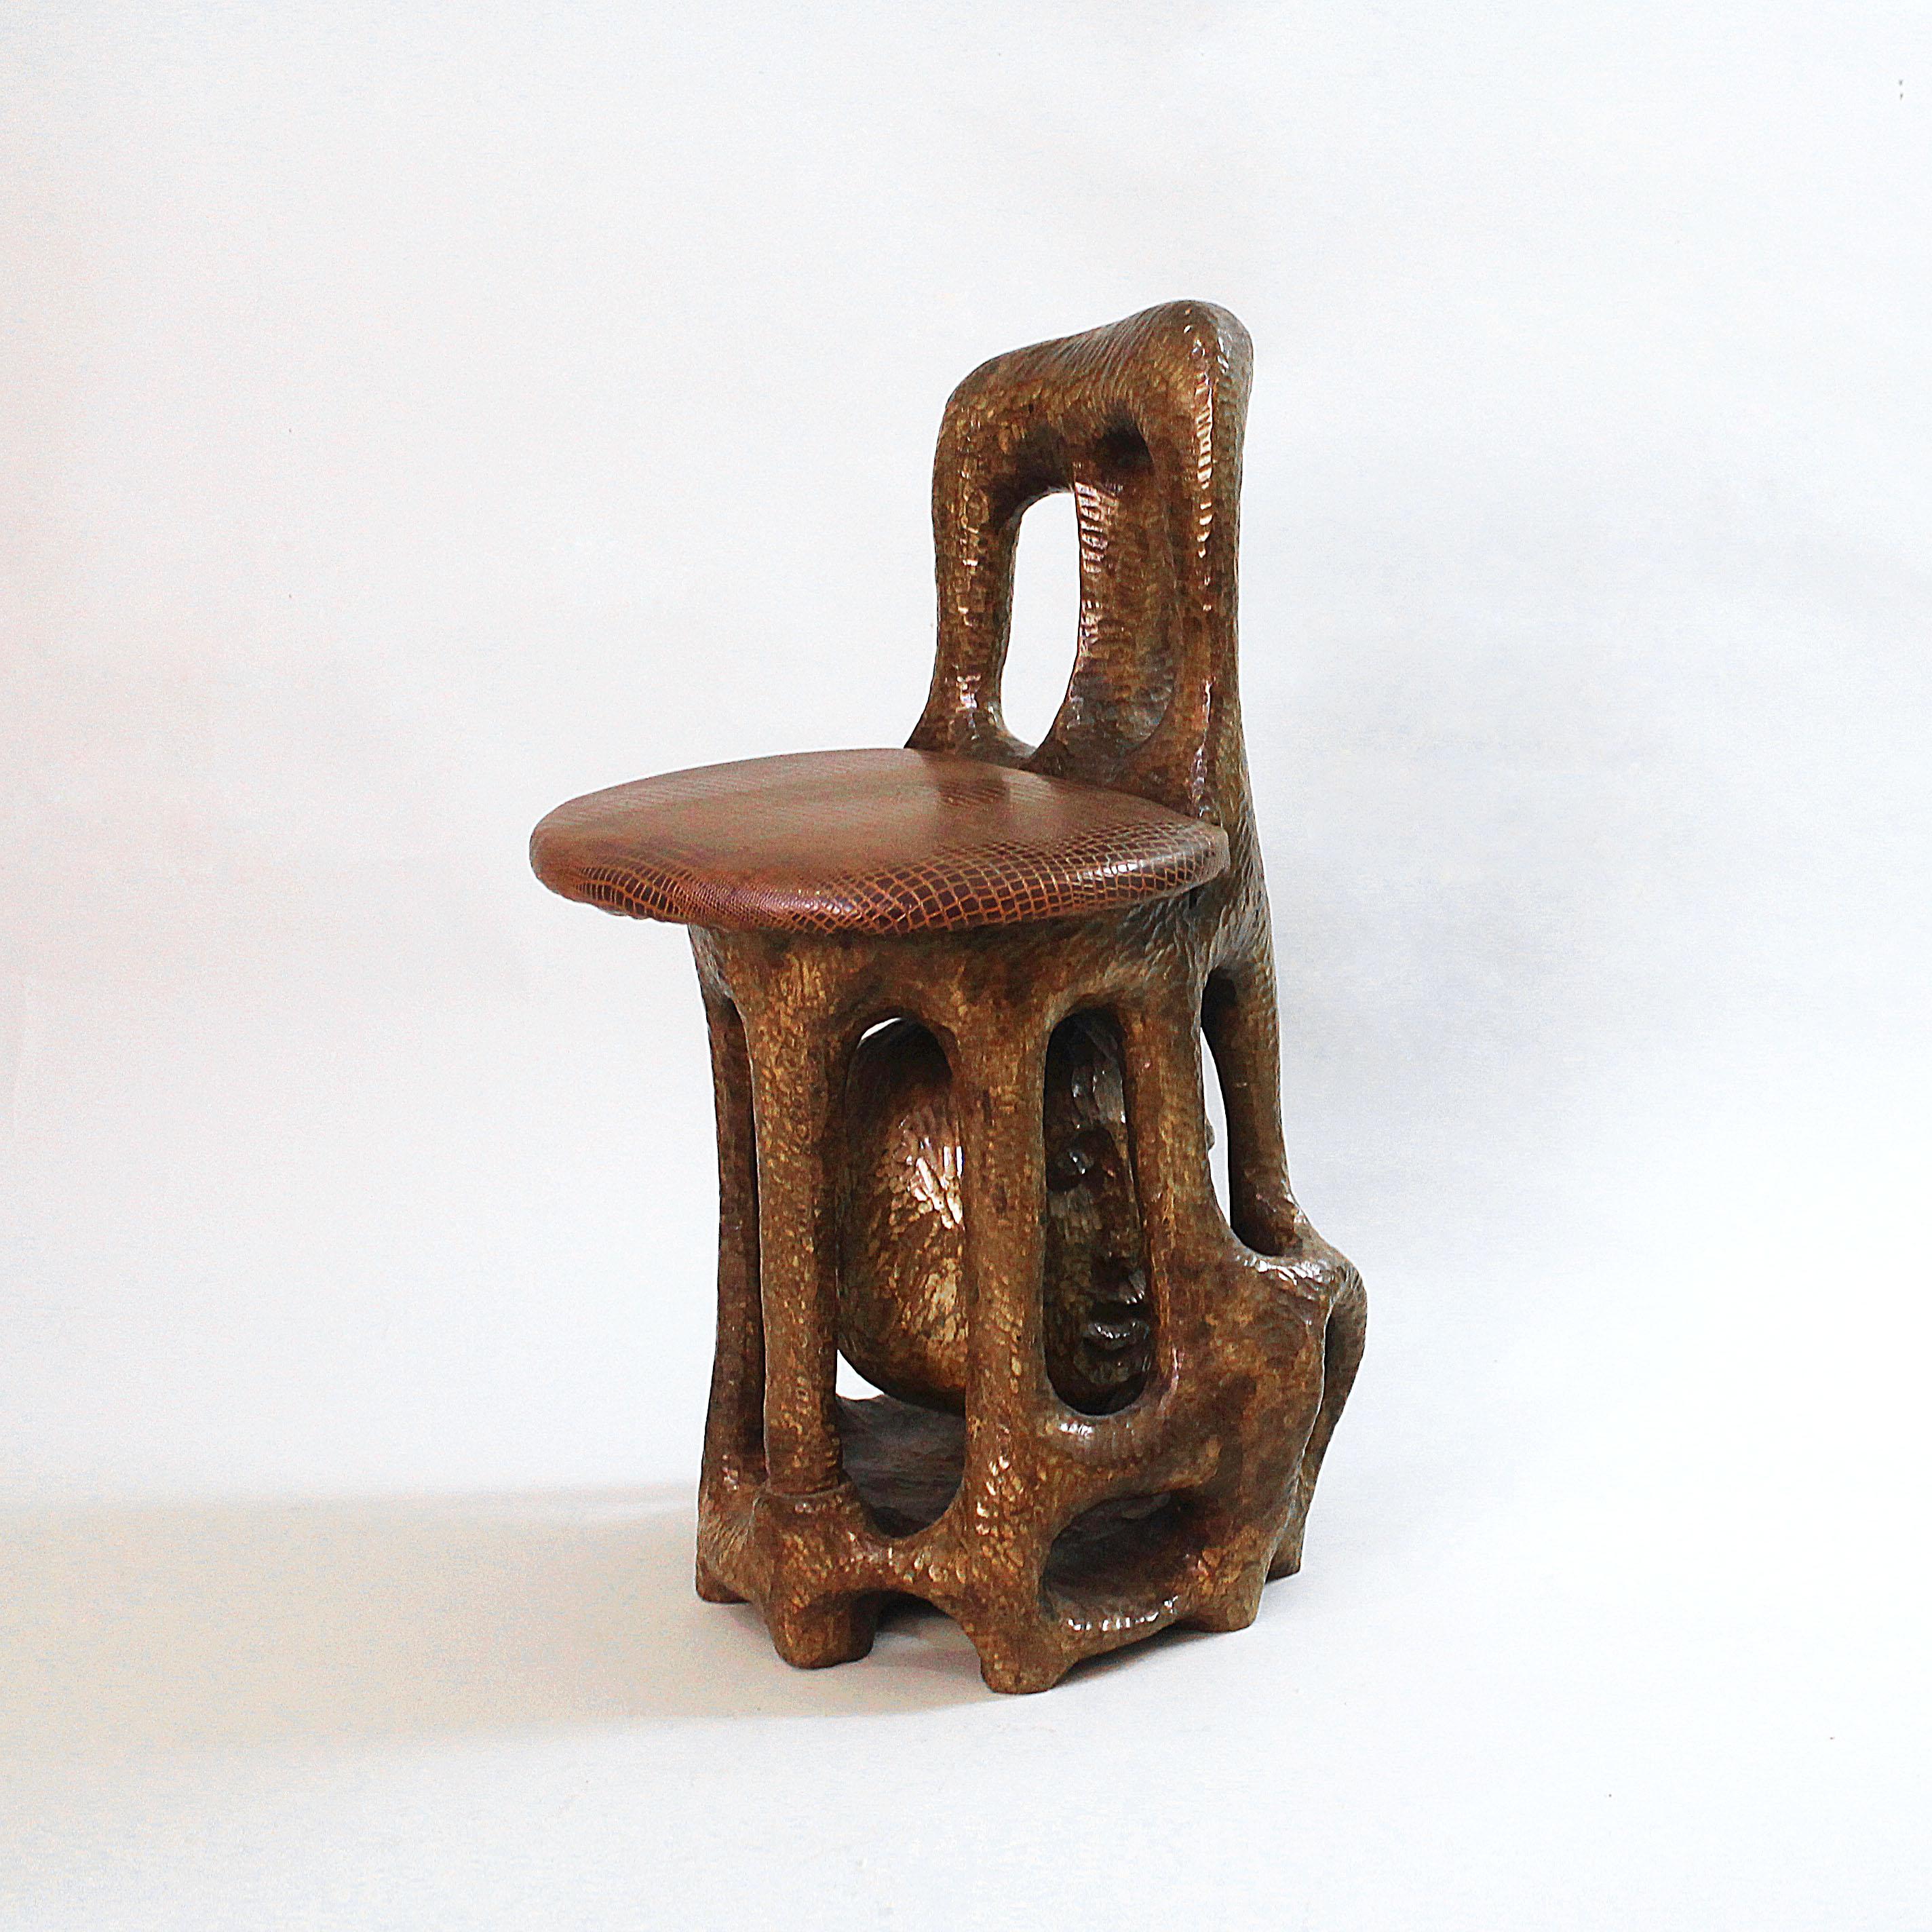 One off, unique Sol Garson sculptural stained wood hand carved chair, signed '74. Seat upholstery is made by Faux Croco leather. Apparently is comfortable. Sol Garson born in 1923 and he lived in the UK where he made his name. This chair is